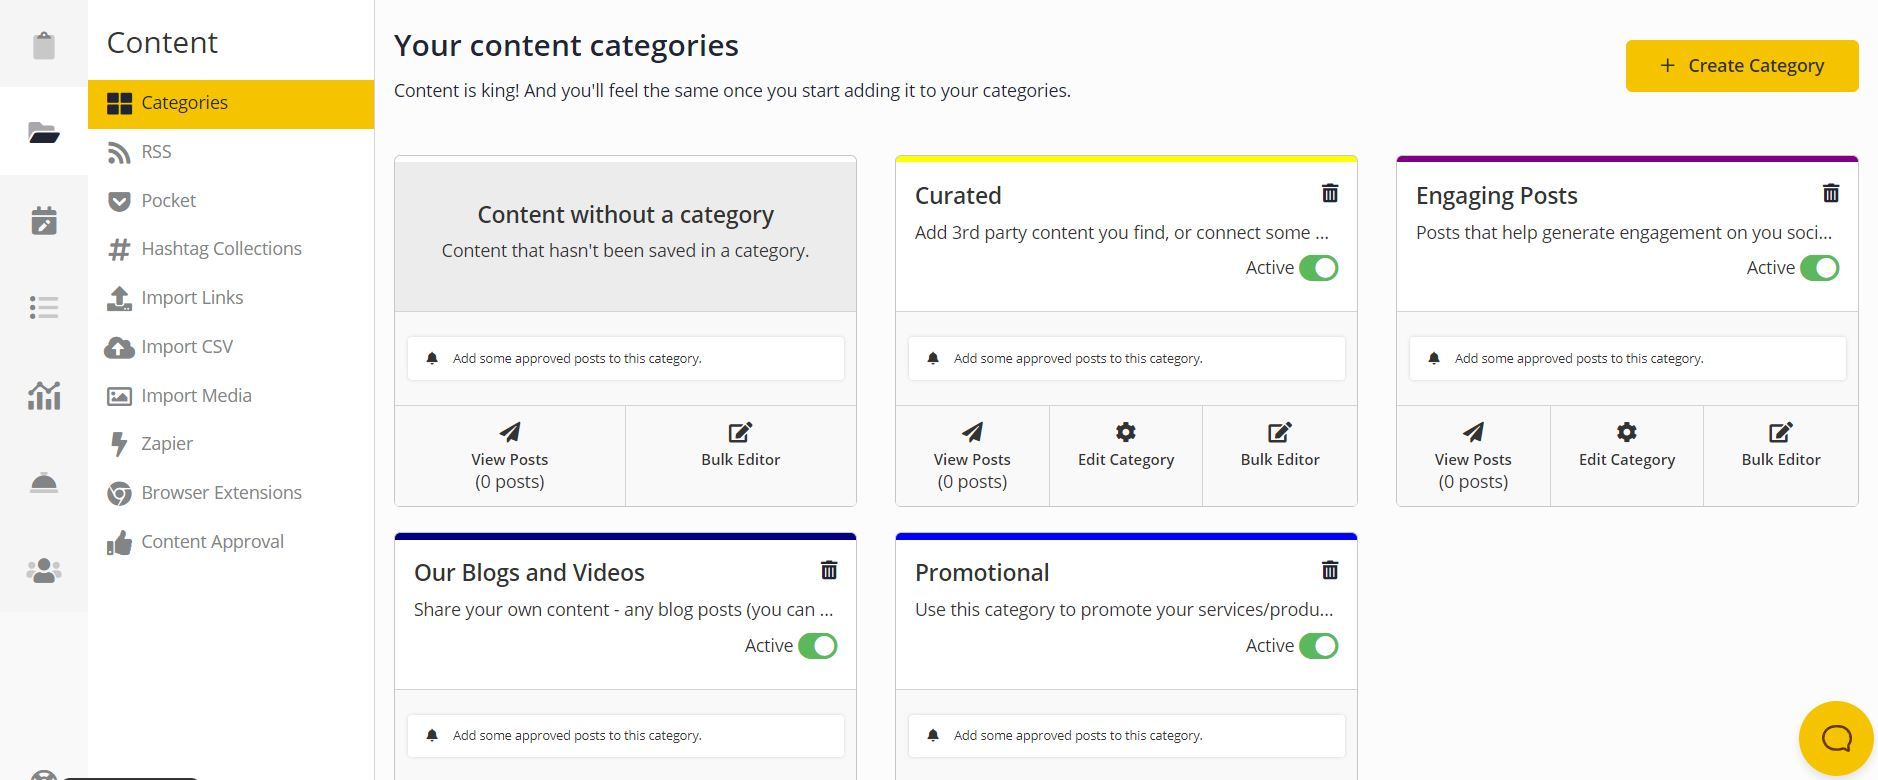 SocialBee scheduling tool helps create categories for the content type you share regularly